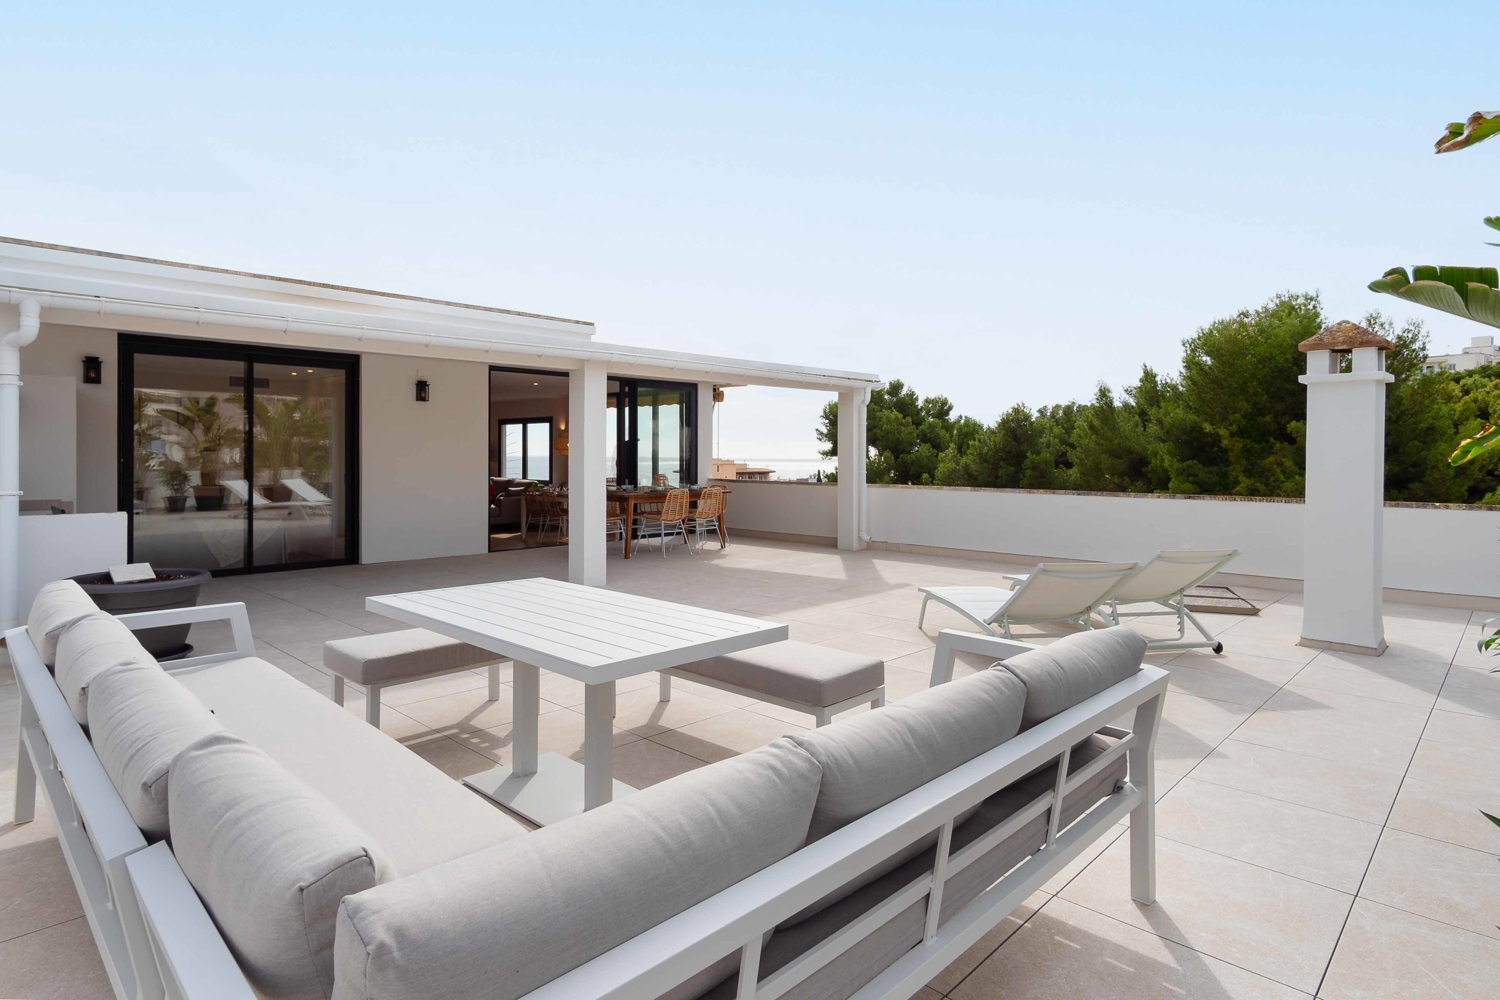 Outstanding Penthouse with 2 private terraces, sea views and swimming pool in Sant Agustí